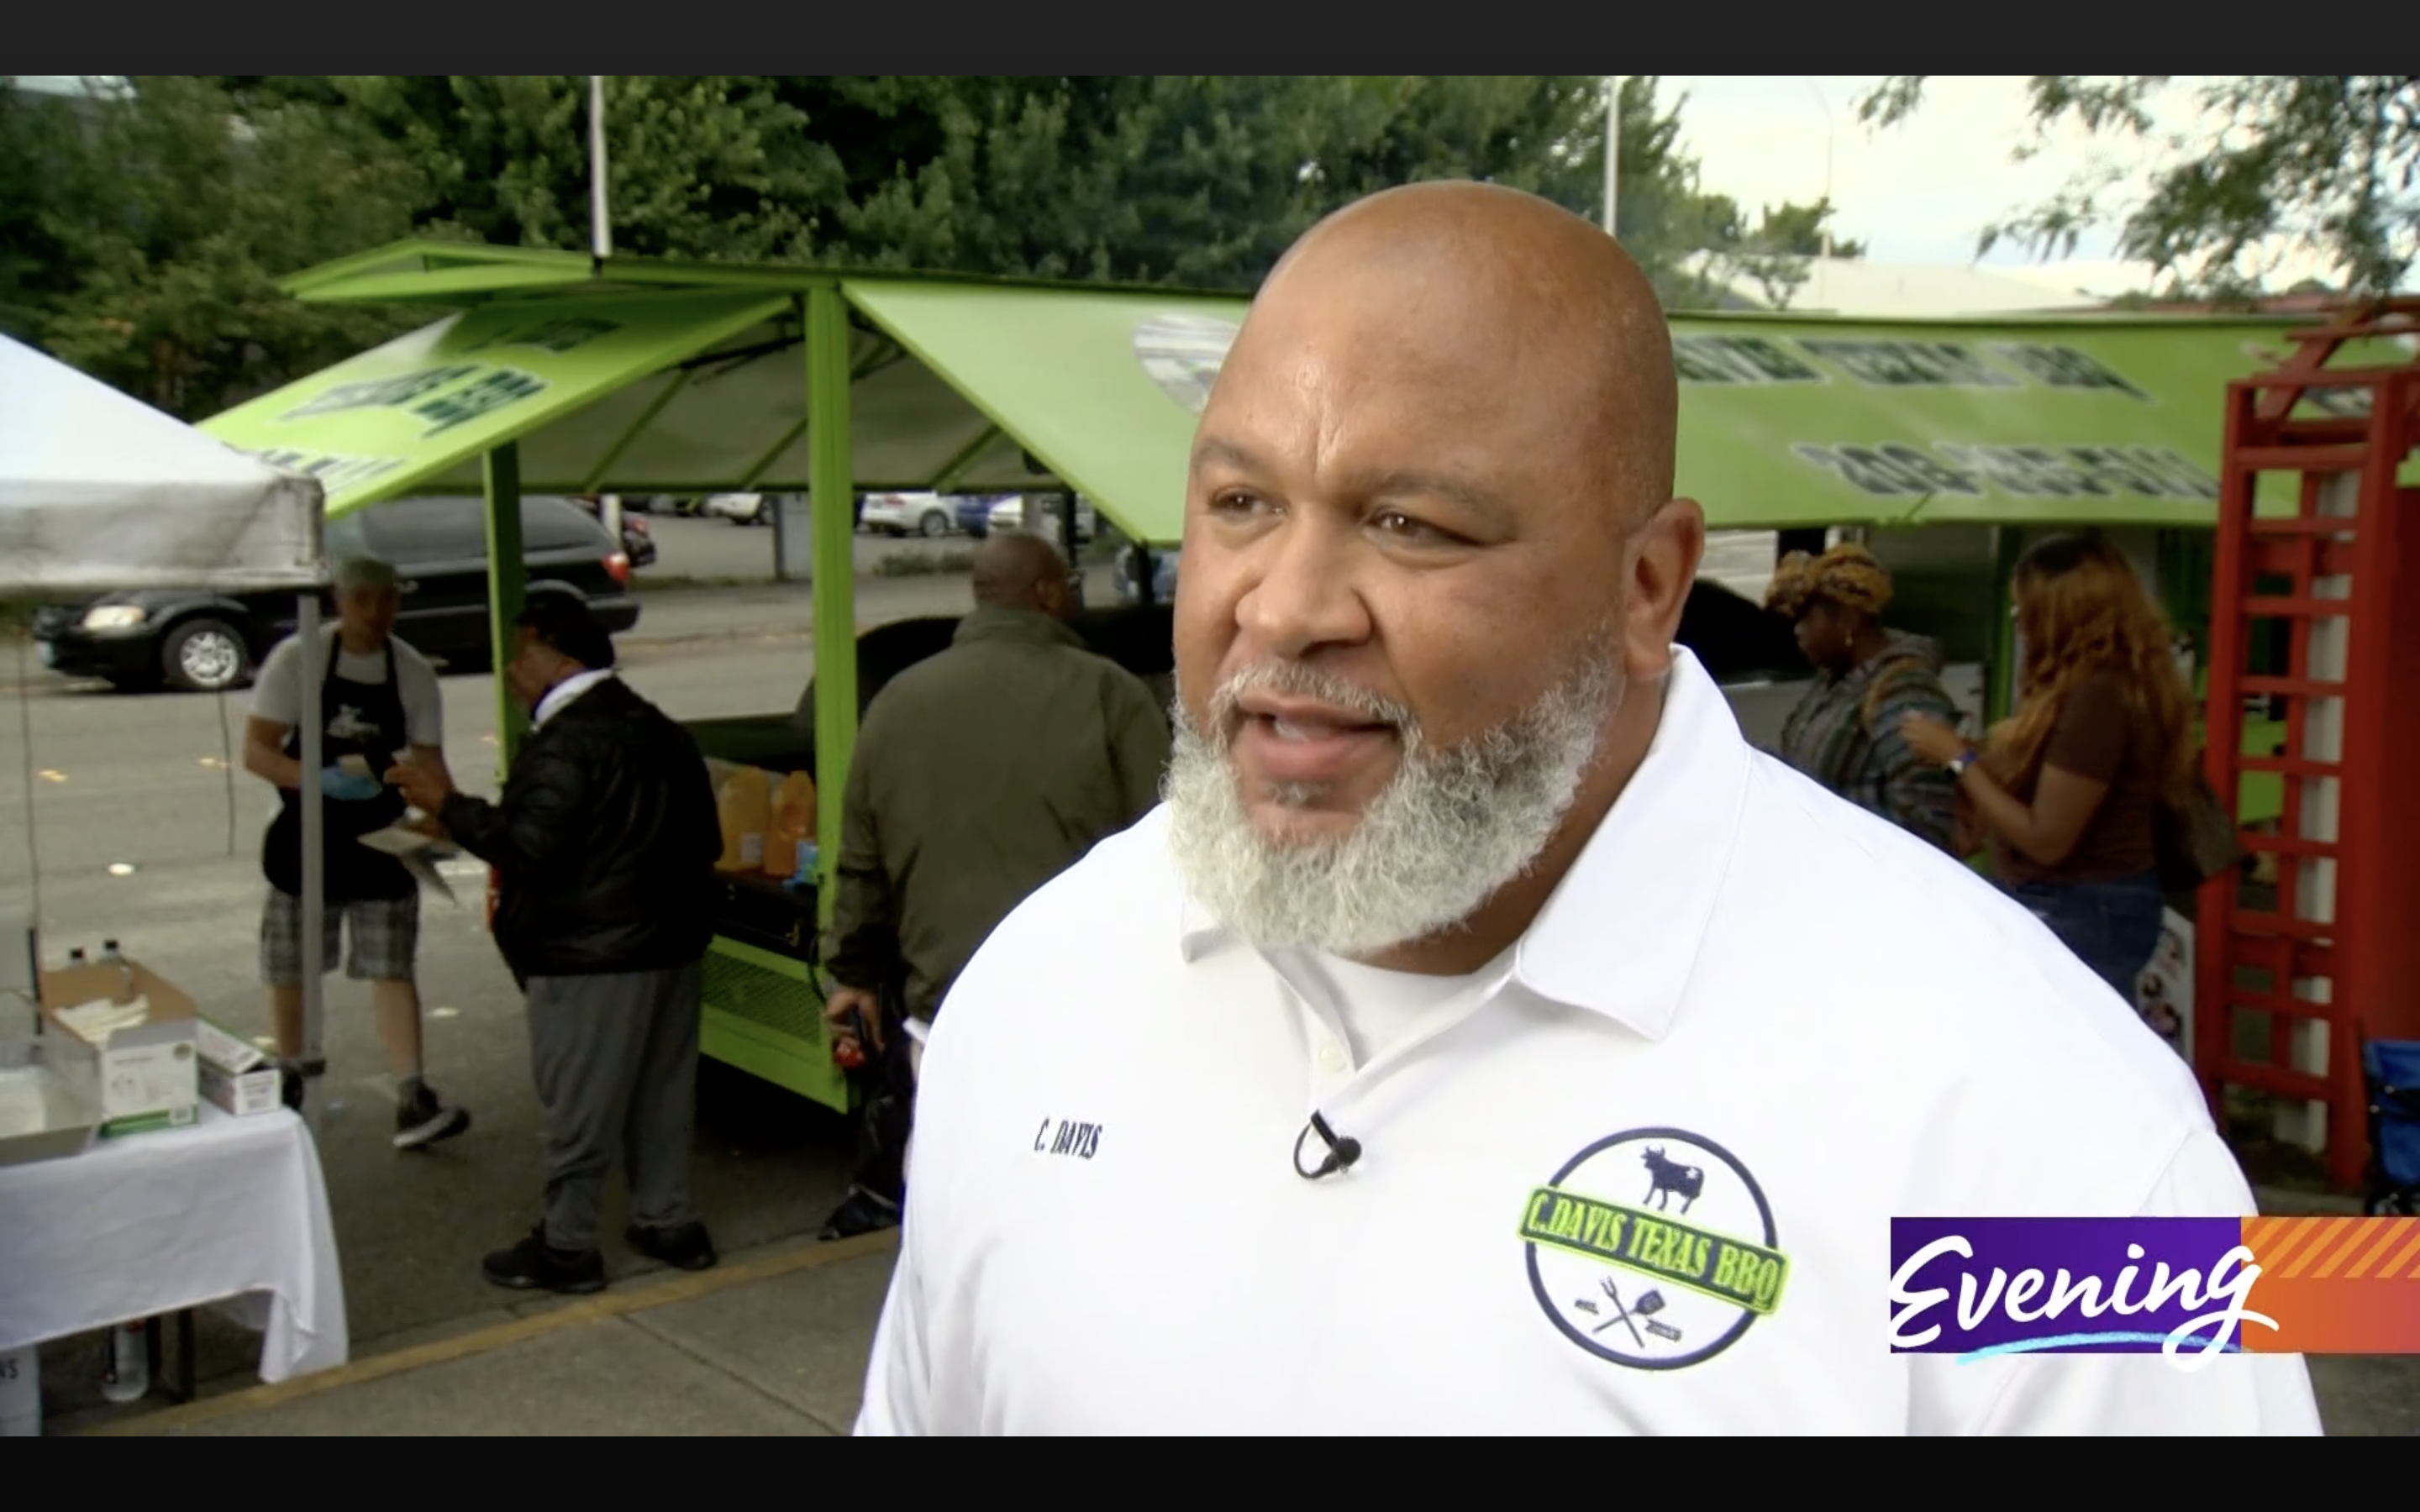 photo of C. Davis of C. Davis Texas BBQ wearing a white polo with his business logo, being interviewed by King5 news